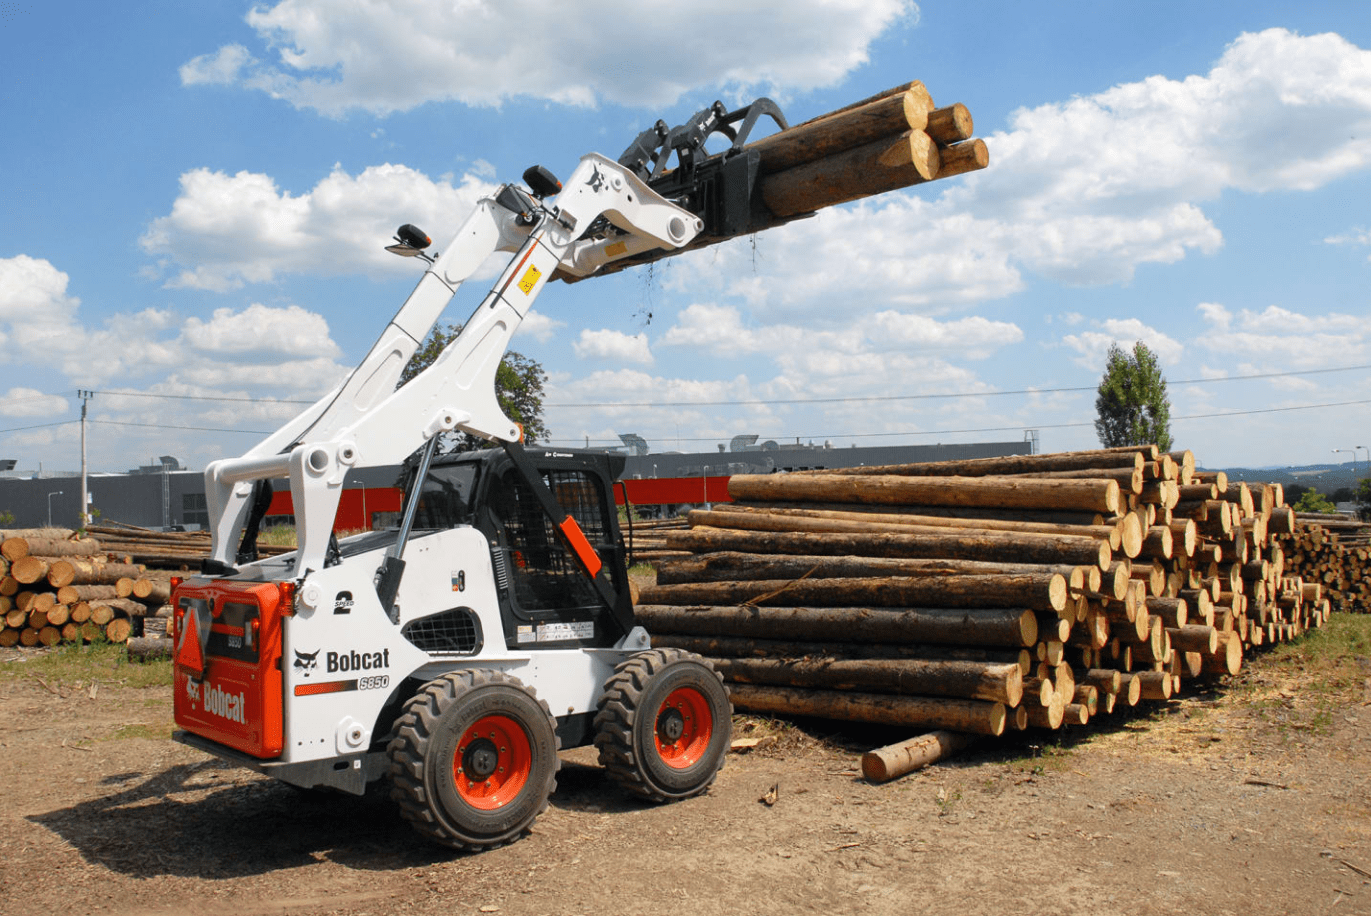 Browse Specs and more for the S850 Skid-Steer Loader - Bobcat of the Rockies